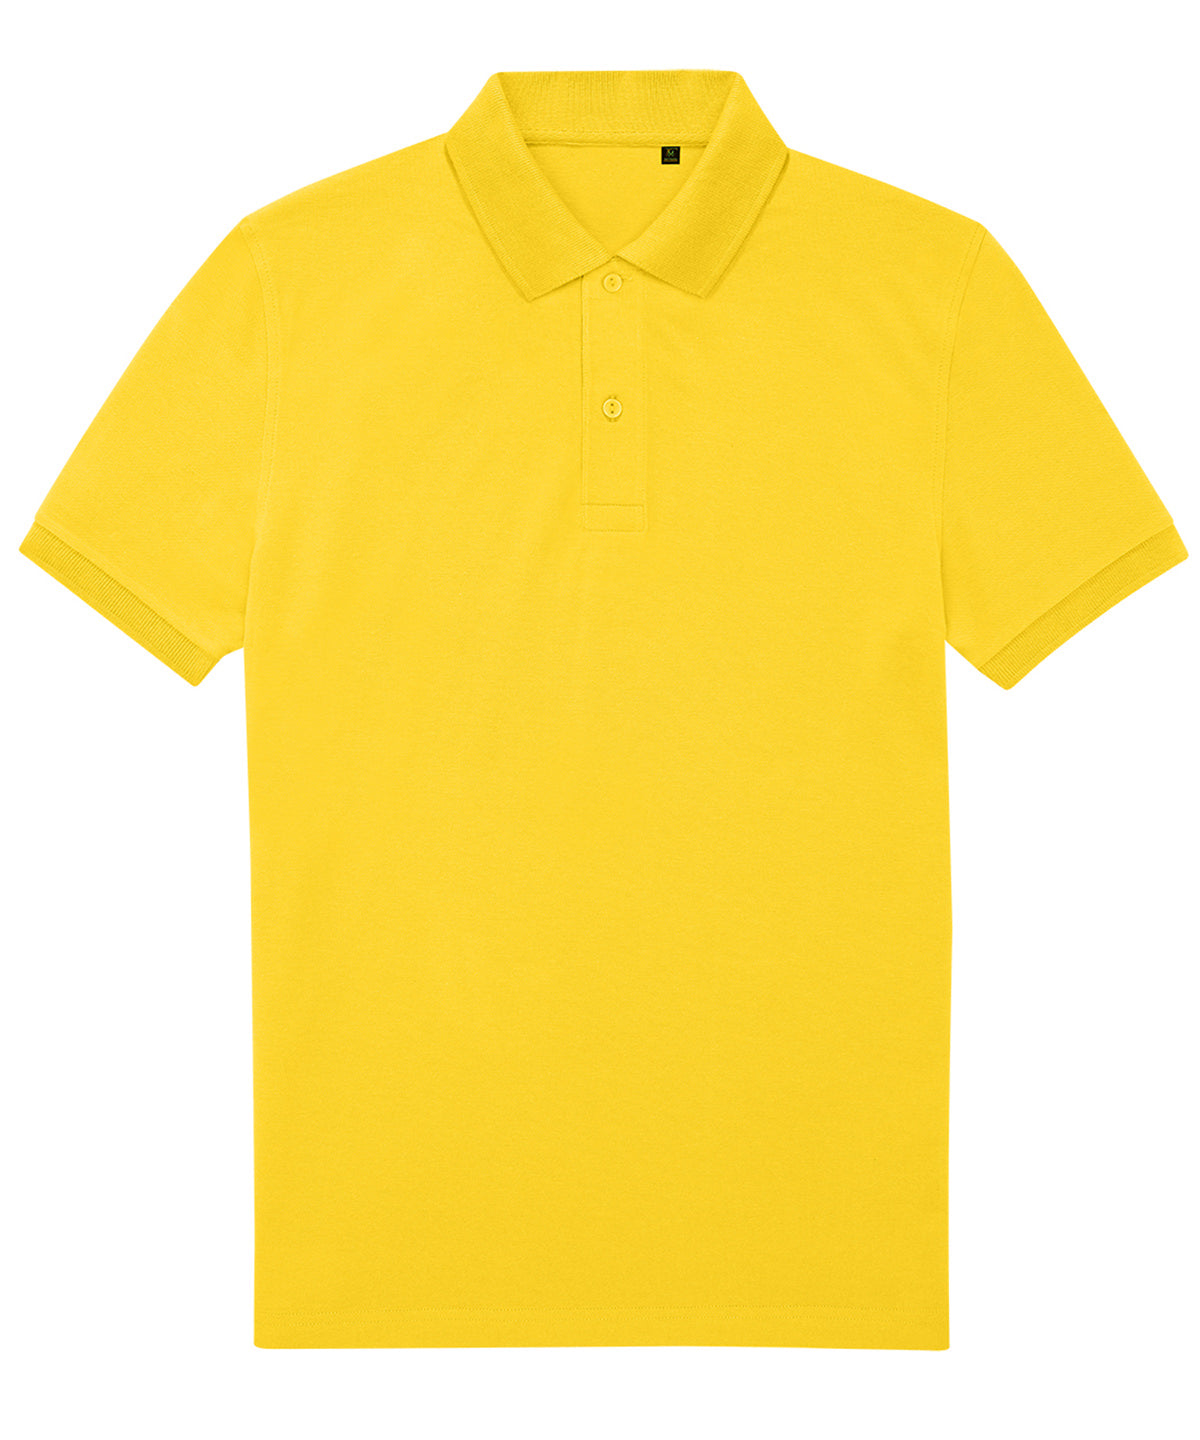 B&C Collection My Eco Polo 65/35 Pop Yellow